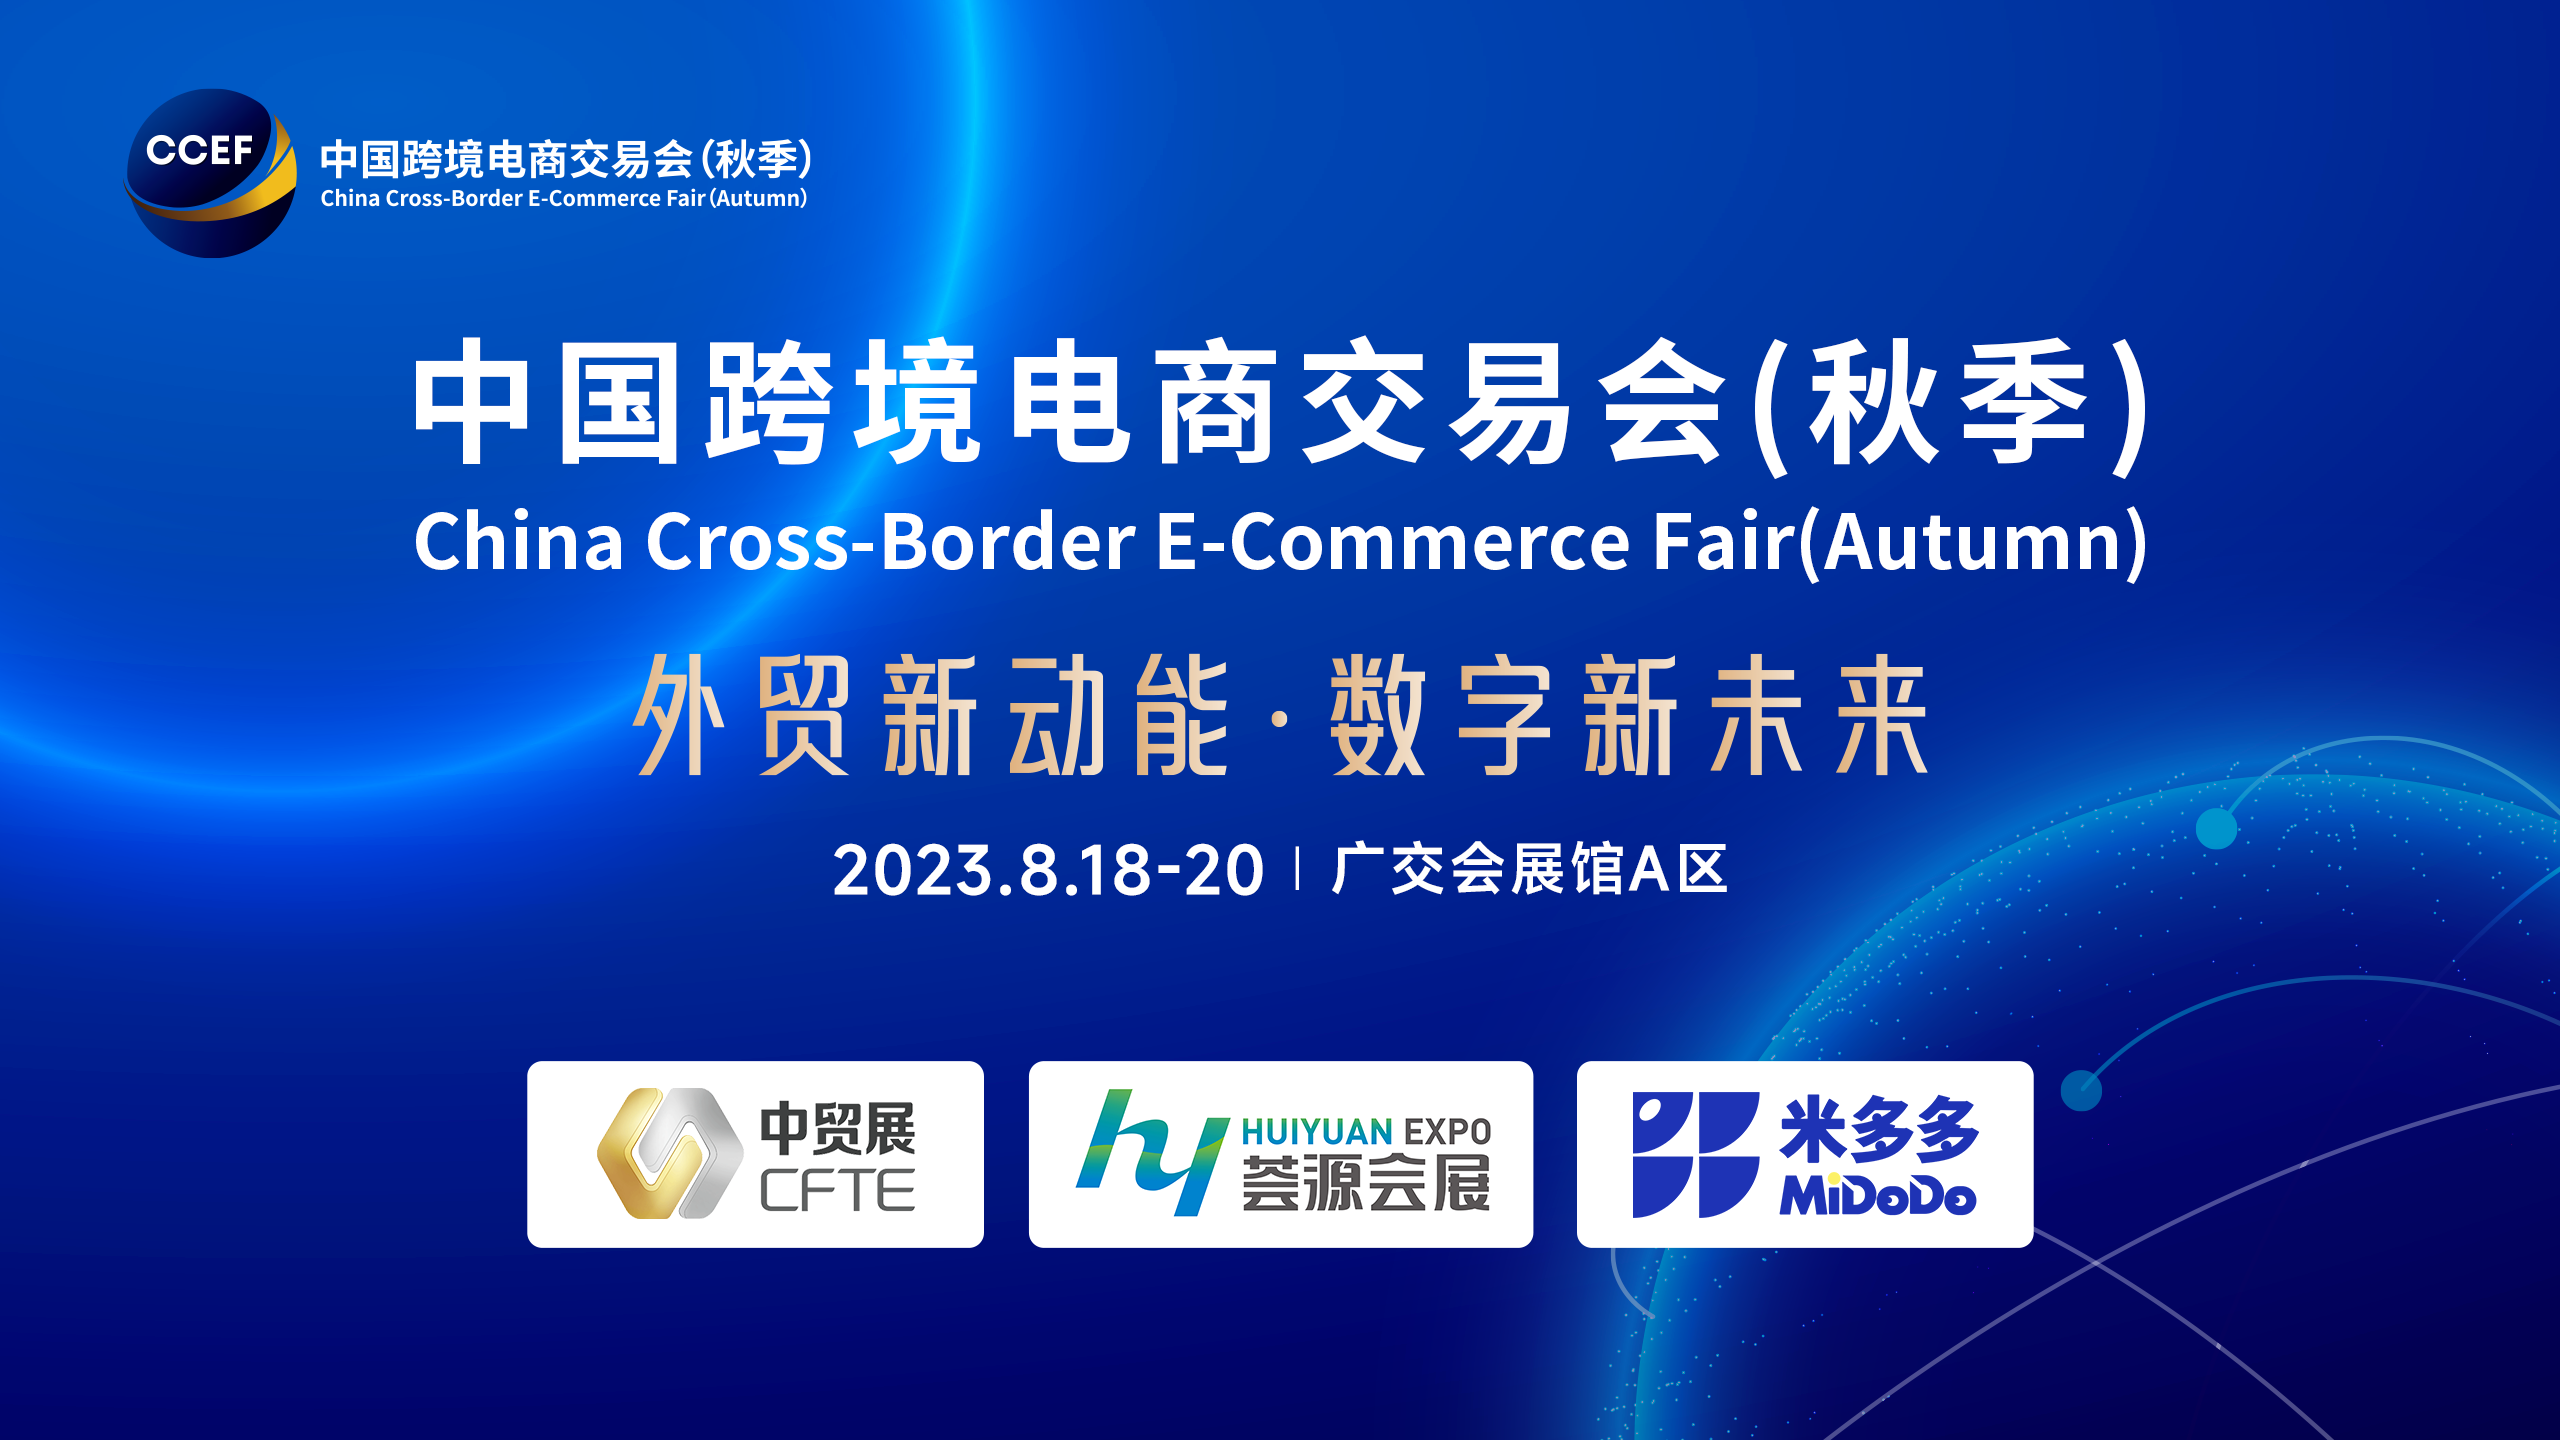 'New momentum for foreign trade·New digital future'--2023 China Cross-border E-commerce Fair (Autumn) concluded successfully